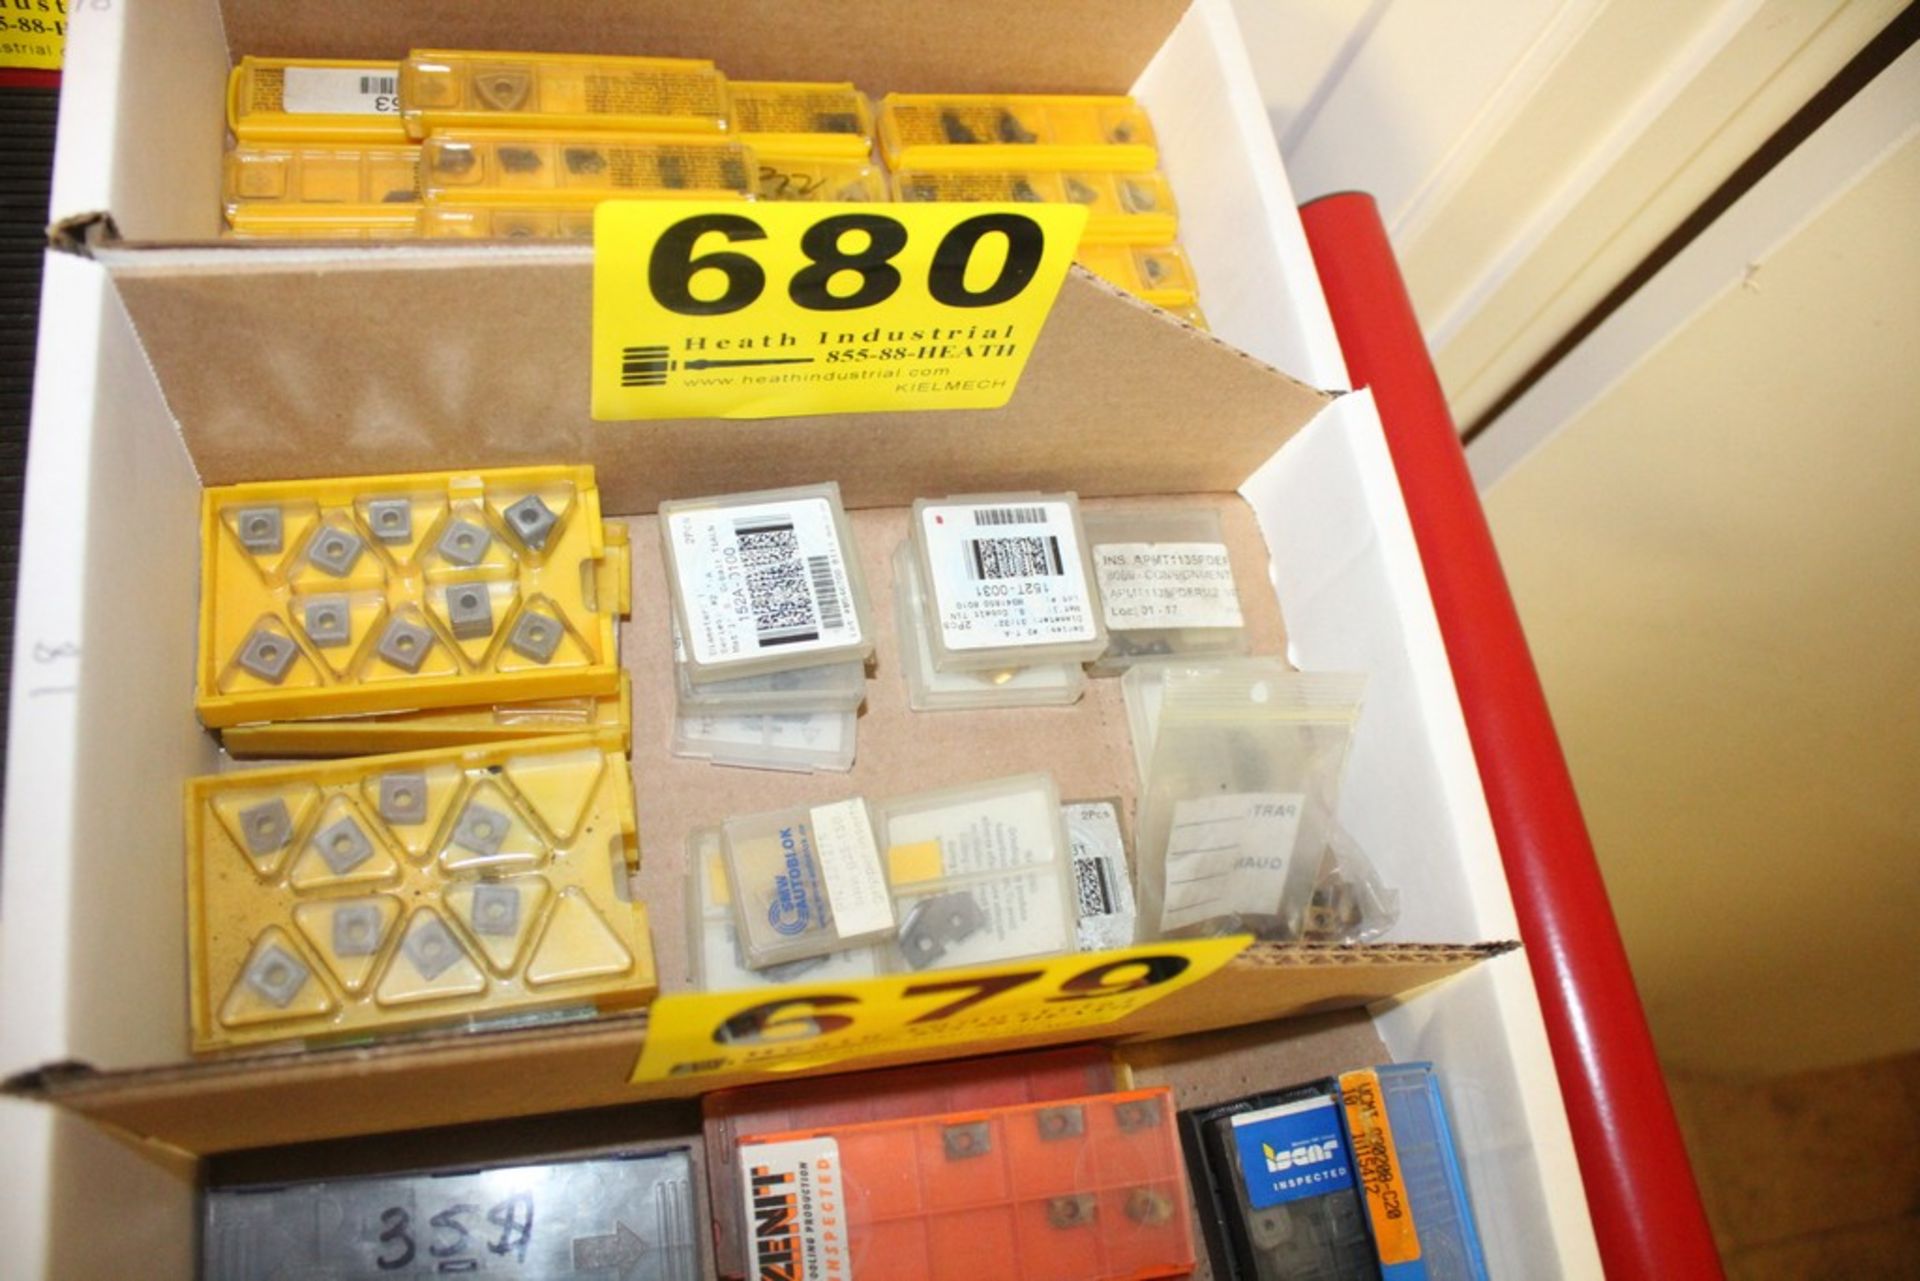 (18) PACKAGES OF INDEXABLE CARBIDE INSERTS, MOST ARE NOT FULL